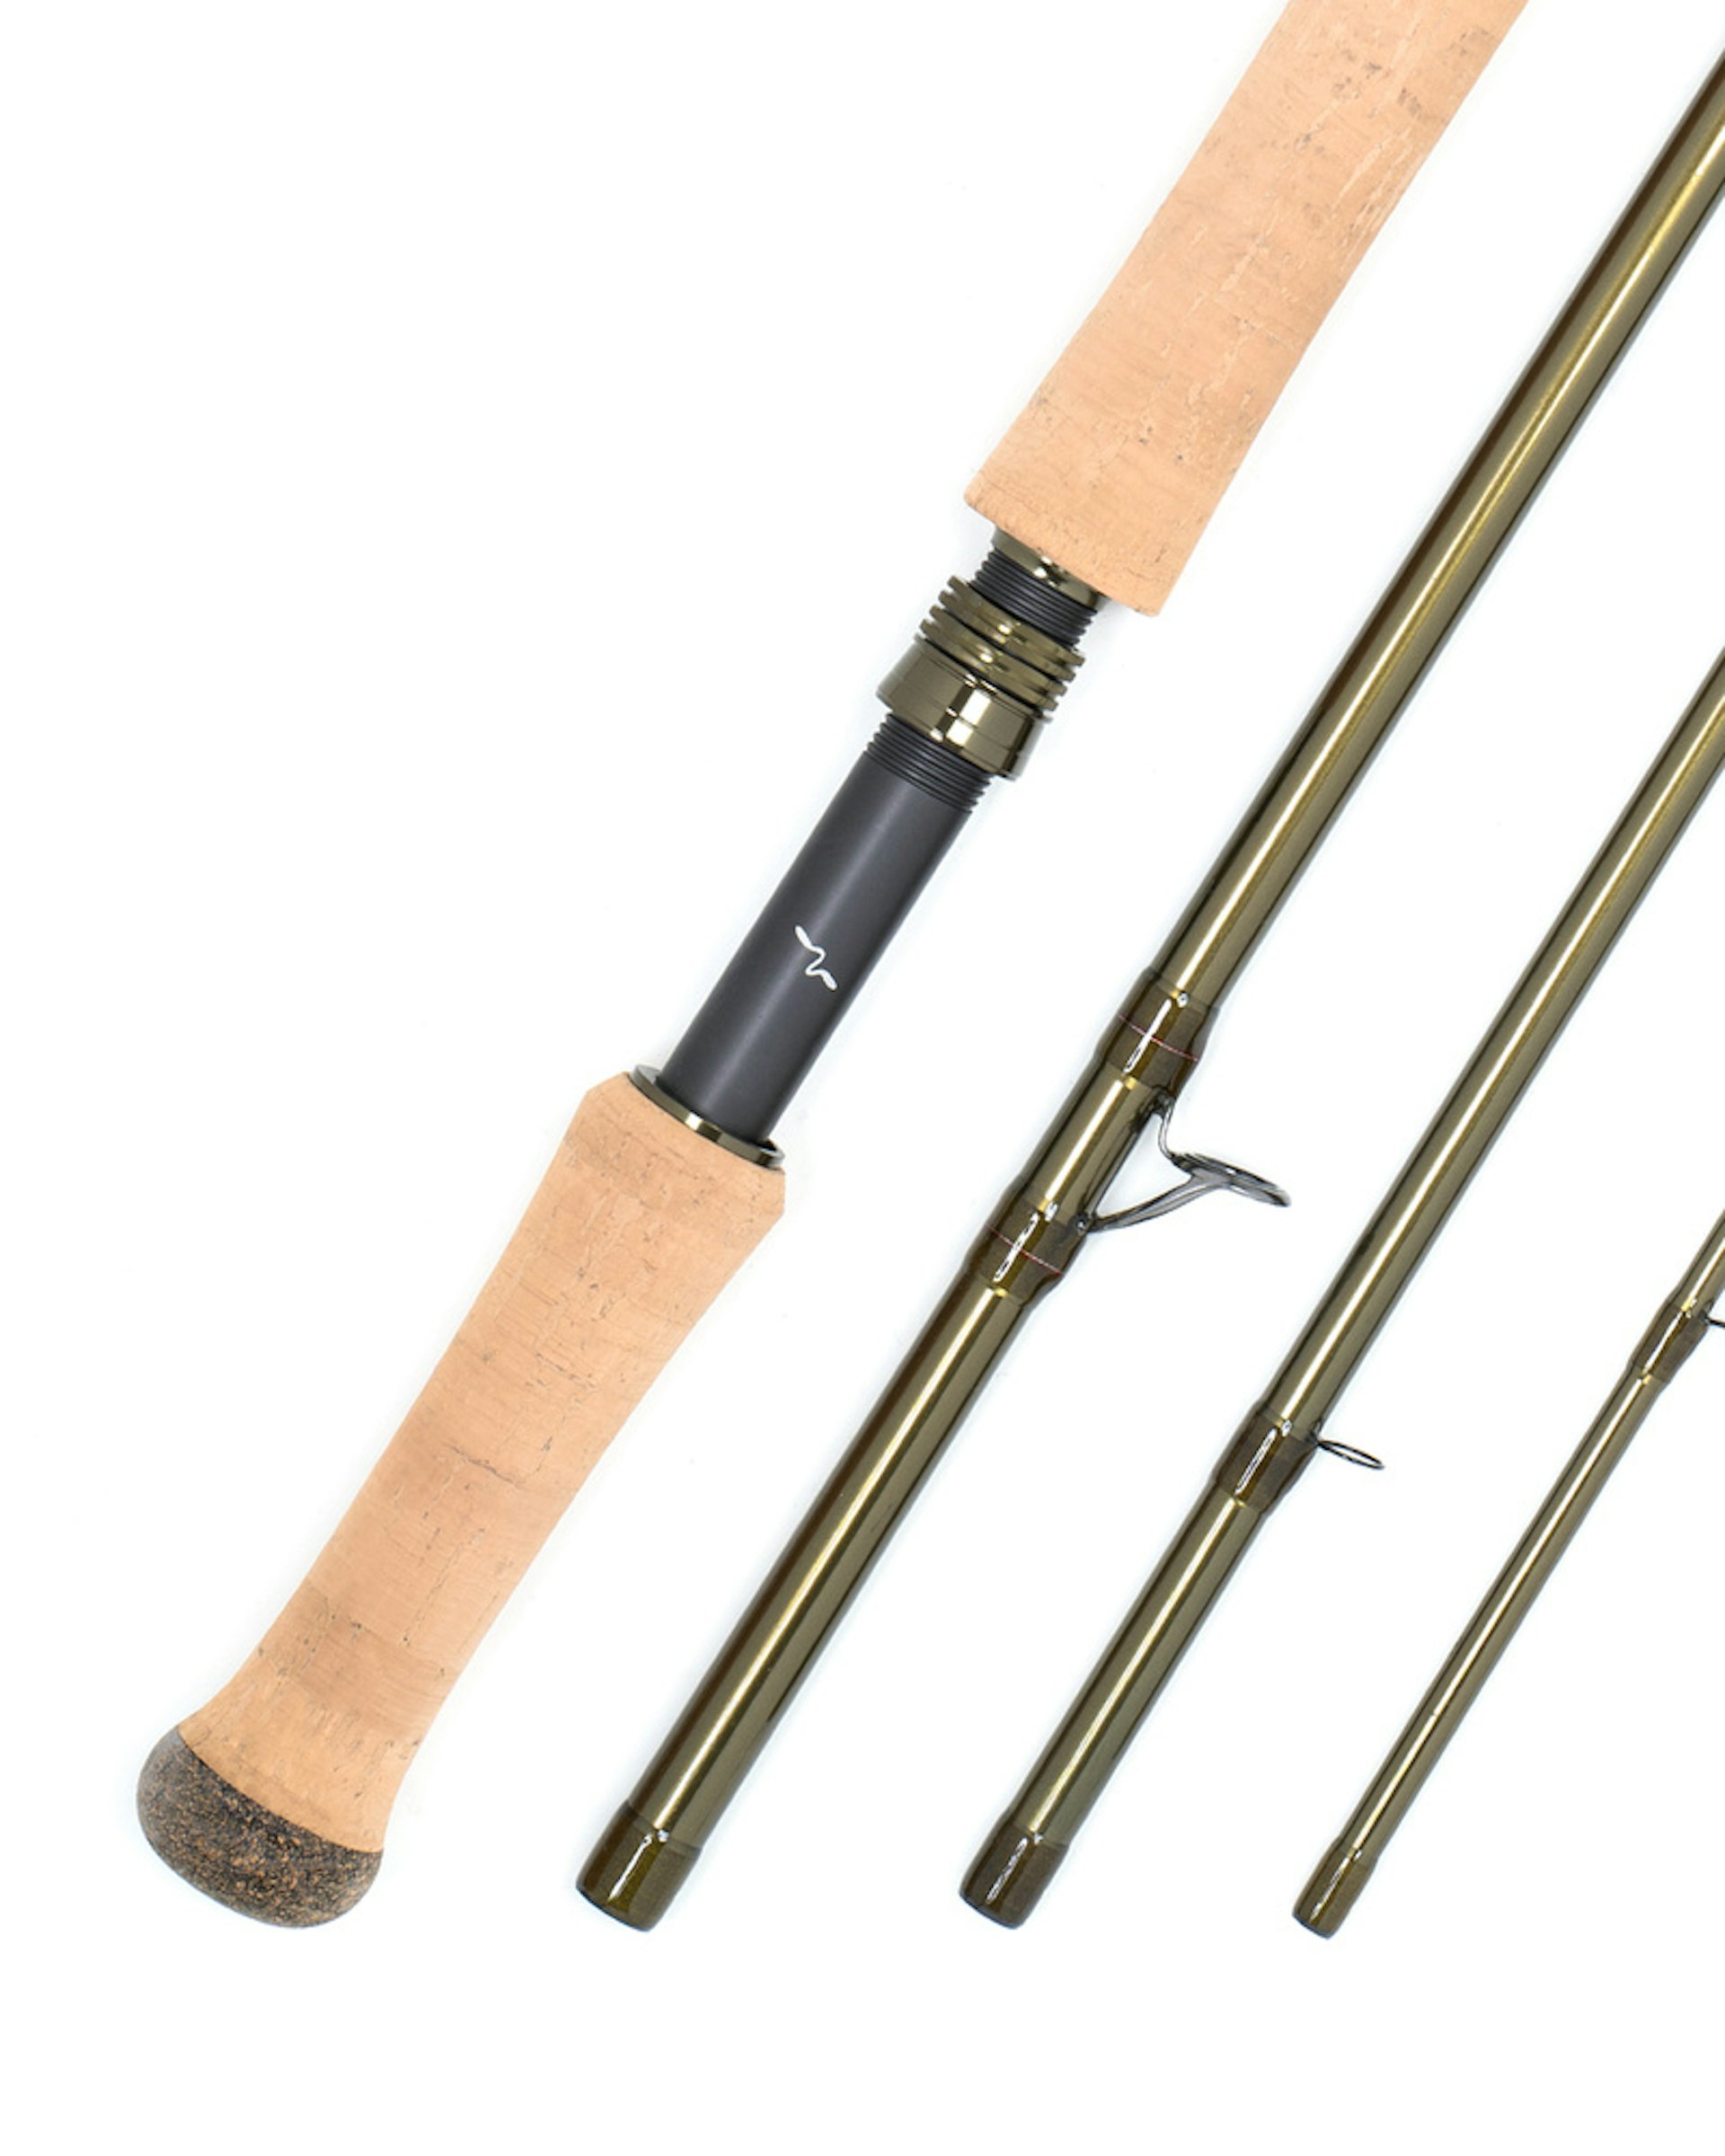 The Best Fly Rods For Salmon - Fly Fishing Field Guides